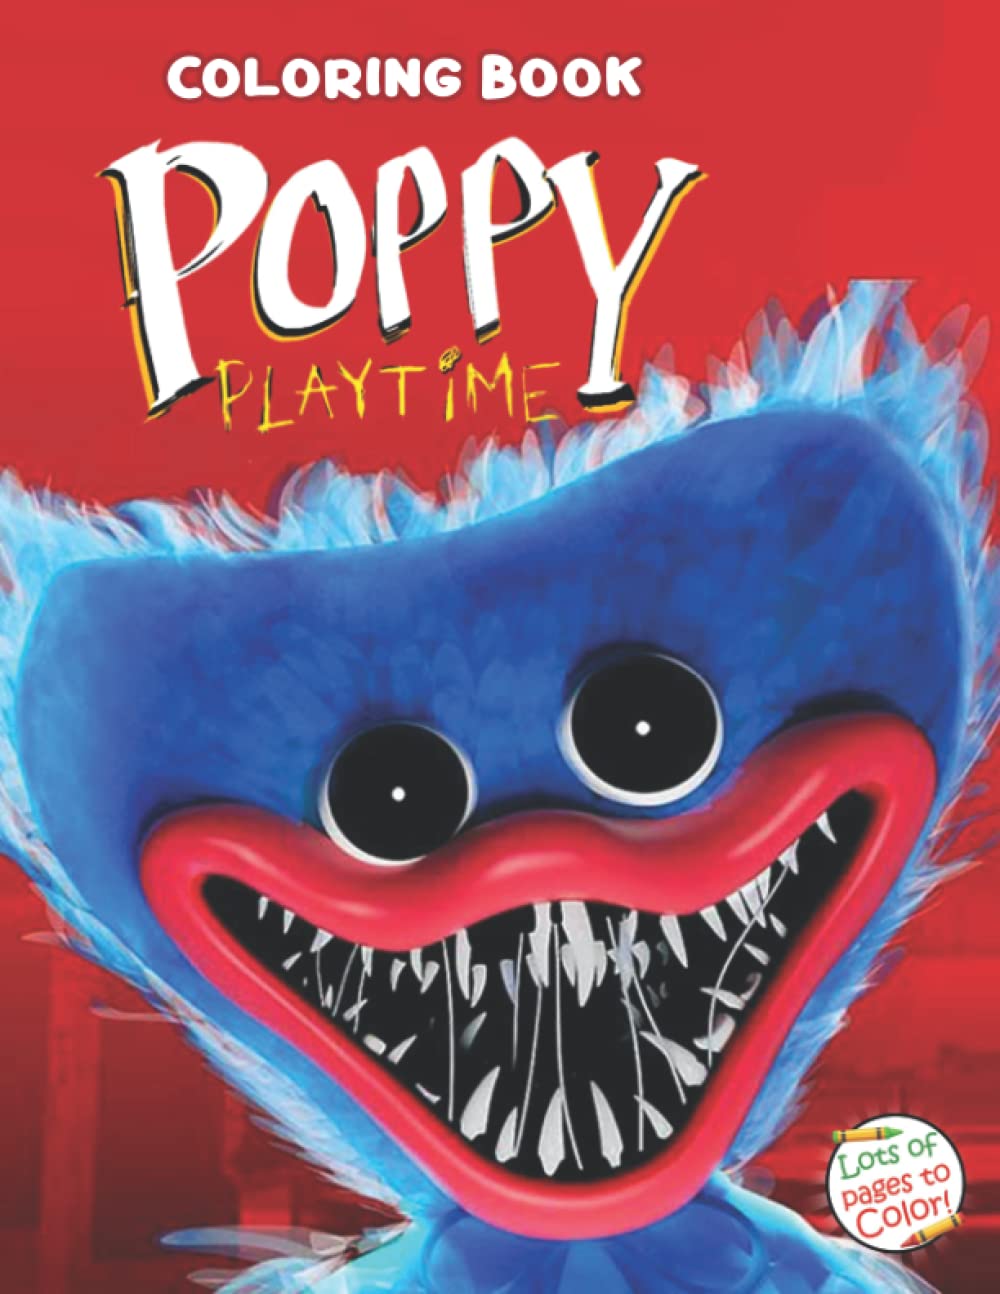 Poppy Playtime Coloring Book: Huggy Wuggy Coloring Book With High Quality Poppy Playtime Illustrations For Kids And Adults To Relax And Have Fun: Scott, Eric: 9798775212346: Books